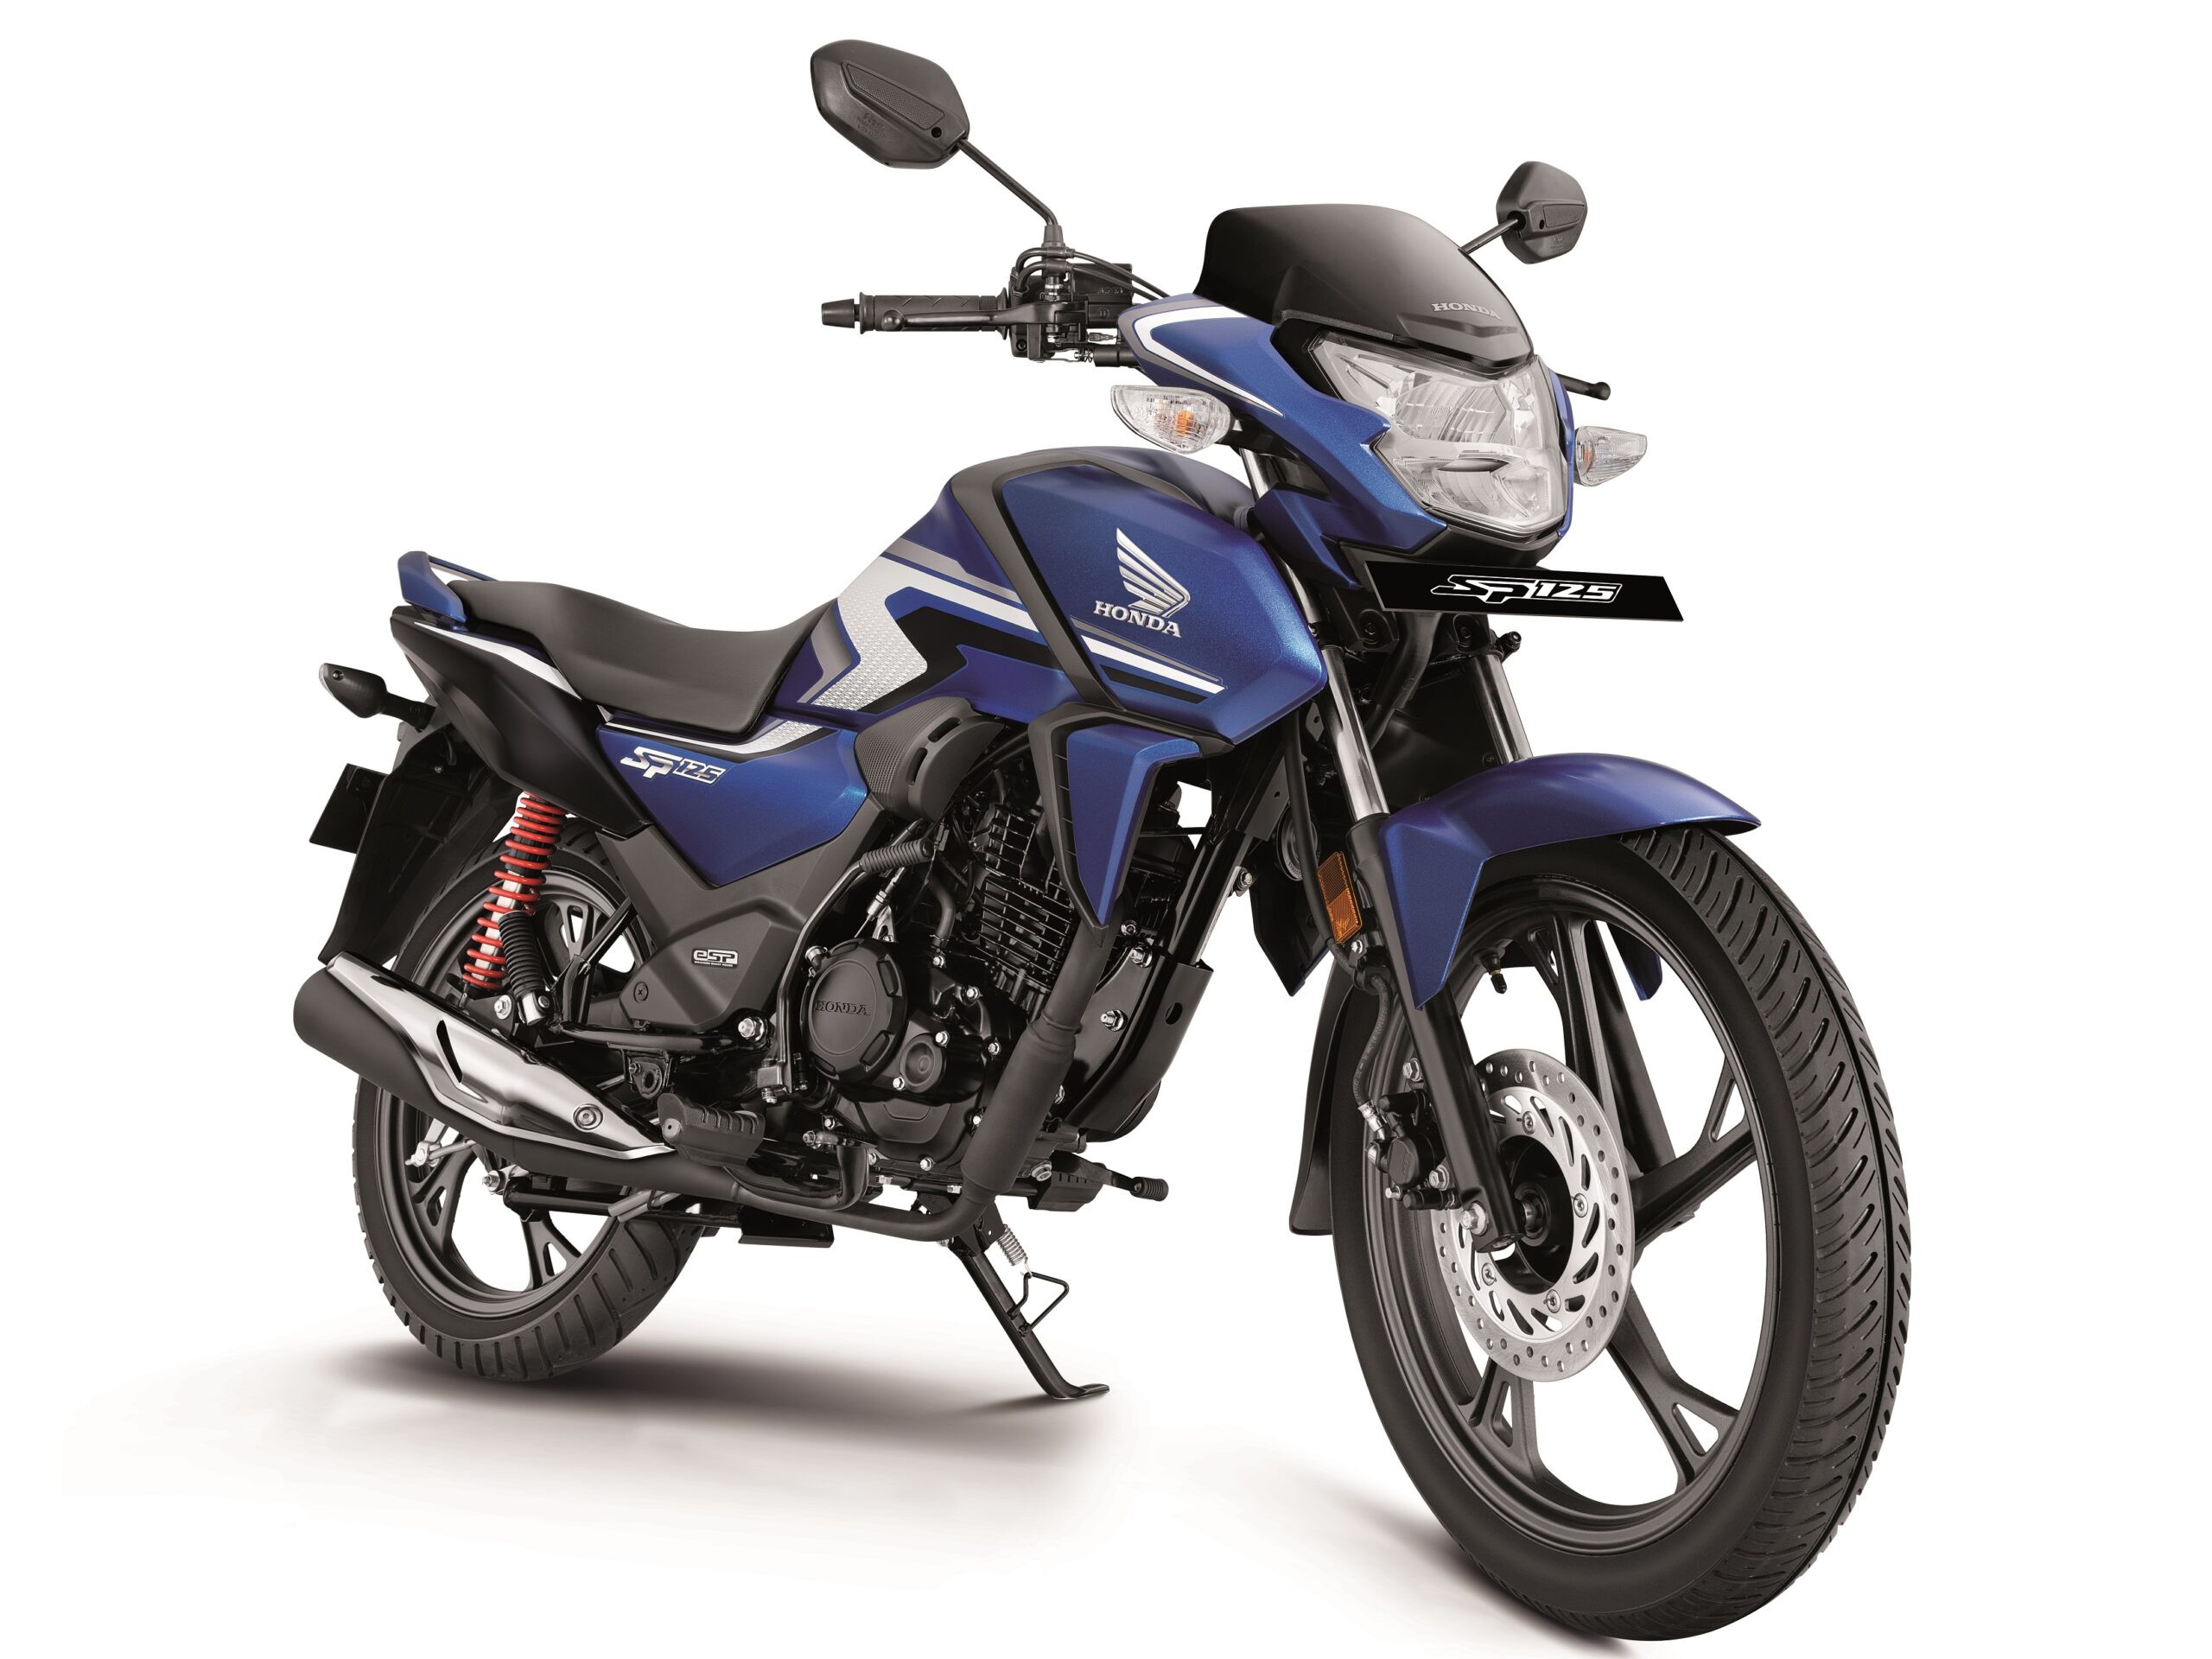 2023 Honda SP 125 Launched With OBD-2 Port And Other Changes (2)